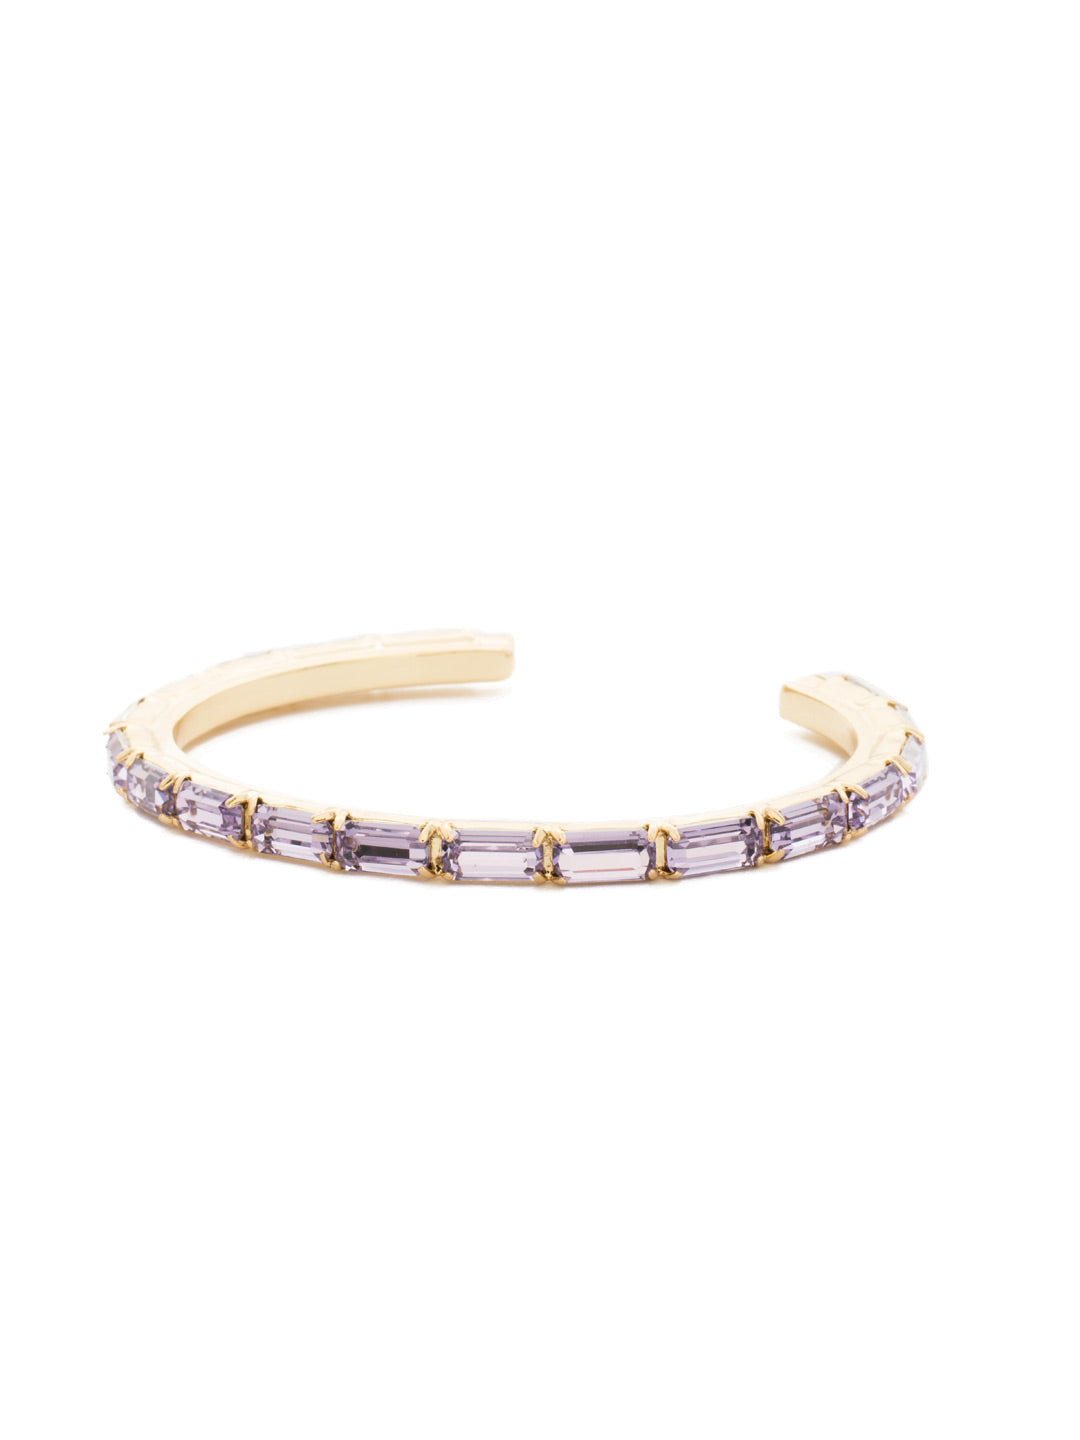 Brilliant Baguette Cuff Bracelet - BDK49BGVI - This cuff bracelet features repeating crystal baguettes and can be mixed and matched in a myriad of ways. From Sorrelli's Violet collection in our Bright Gold-tone finish.